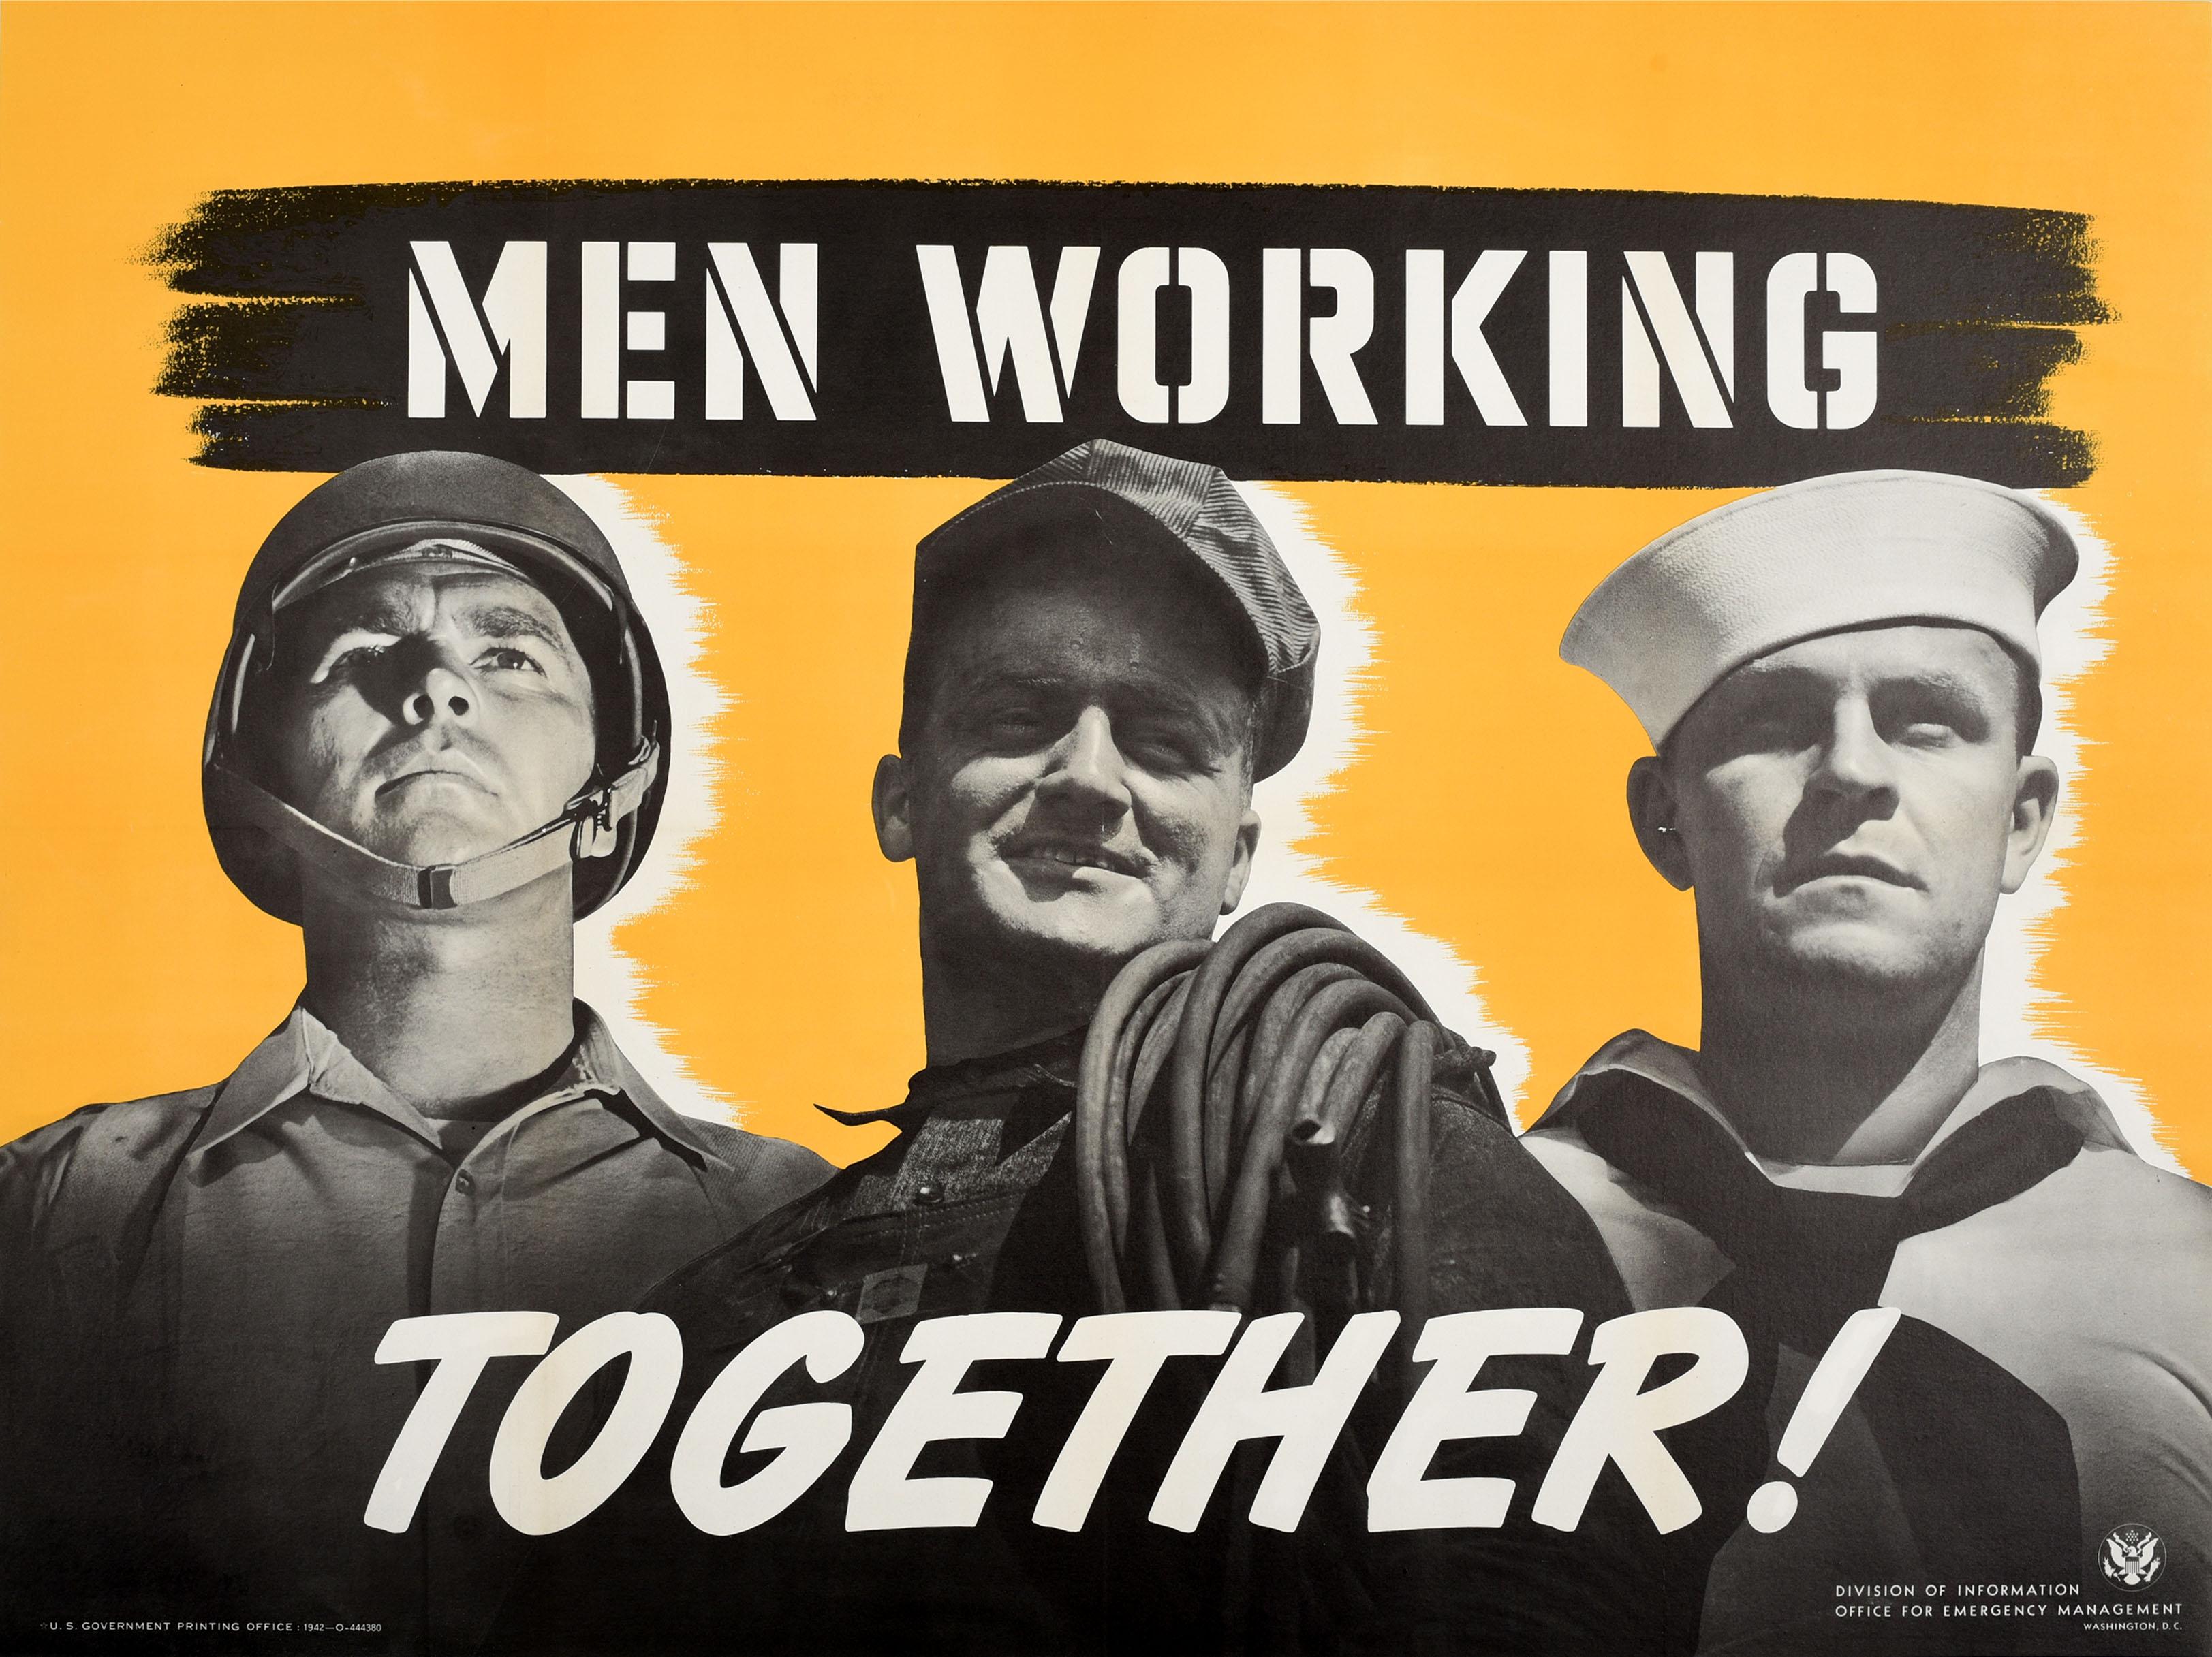 Unknown Print - Original Vintage WWII Poster Men Working Together US Military Home Front Workers